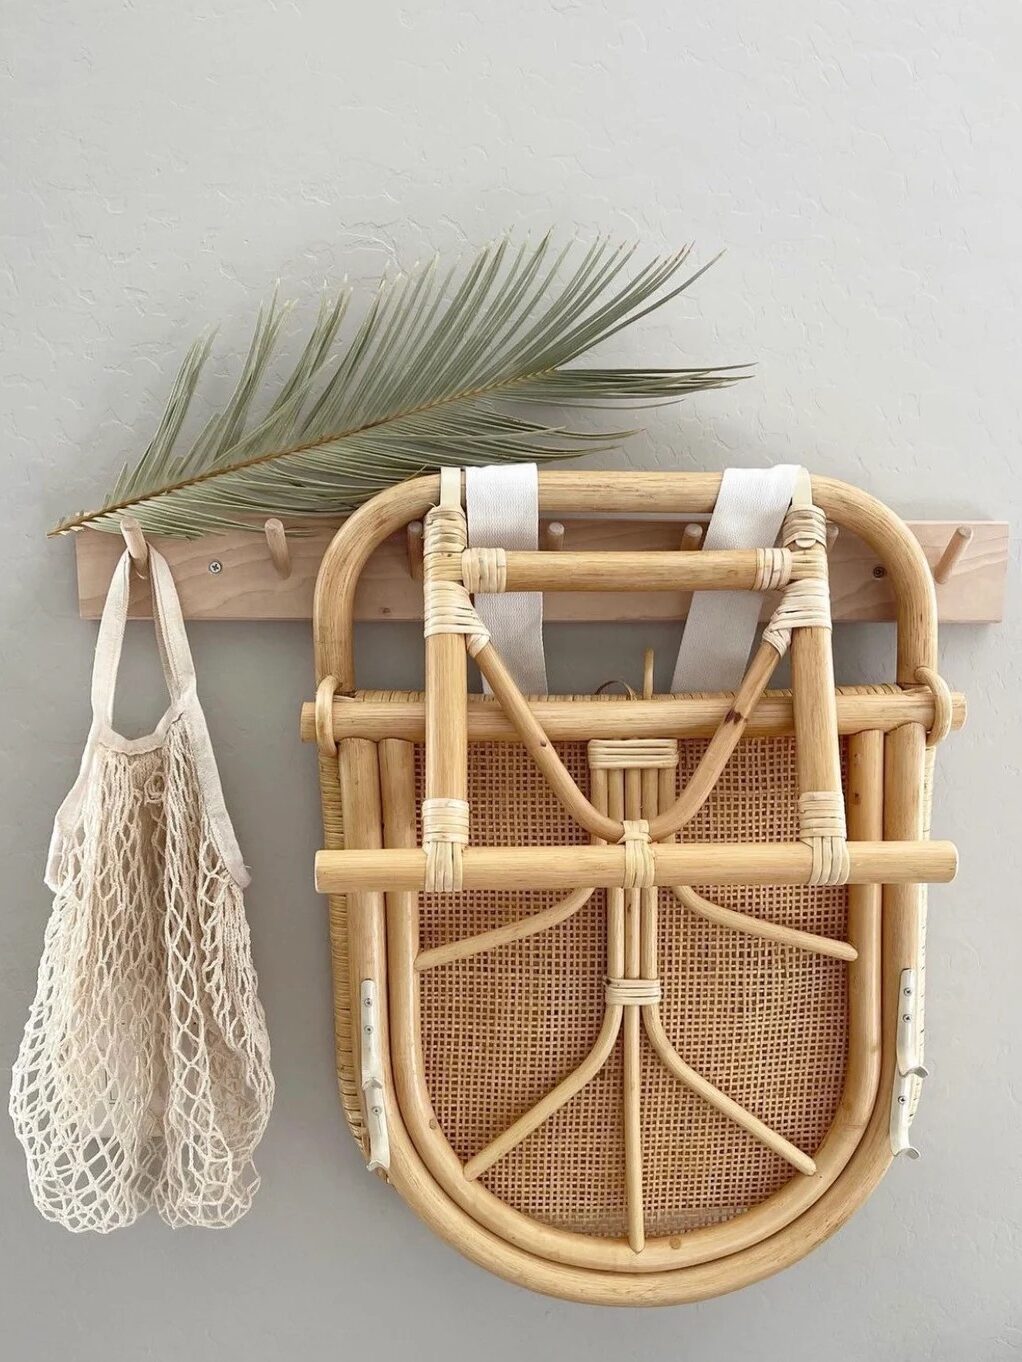 A wooden peg rack holds a folded rattan chair, an empty mesh bag, and a decorative palm leaf against a plain wall.